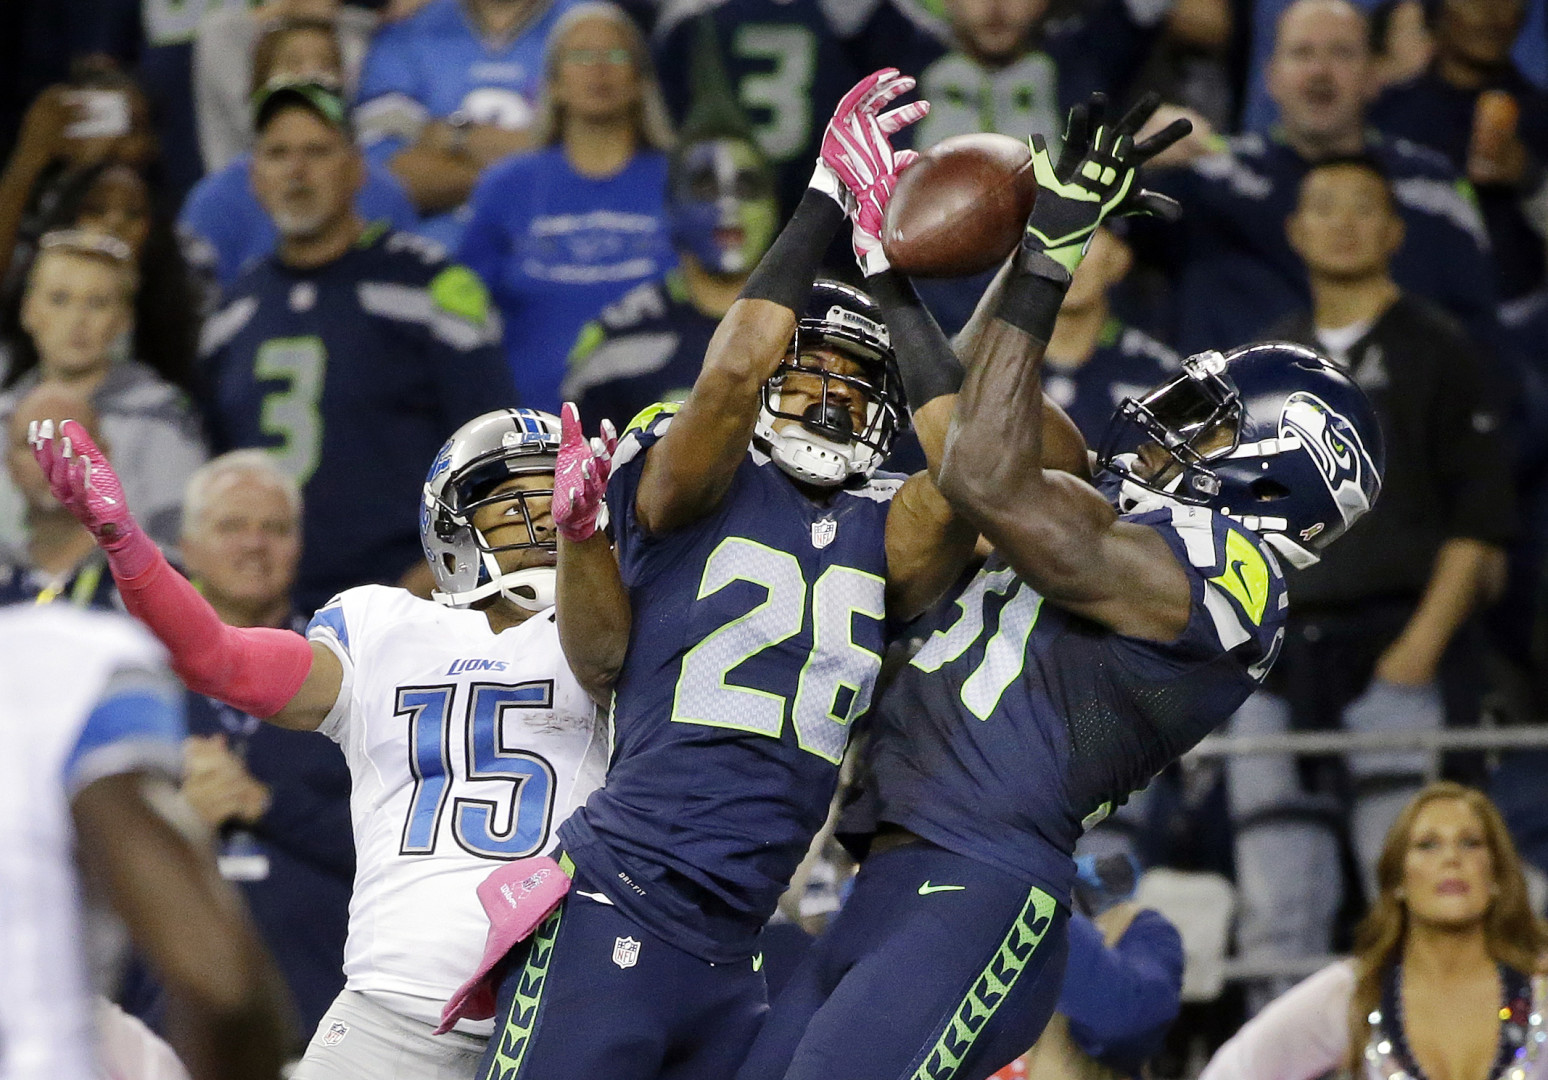 Seattle Seahawks strong safety Kam Chancellor, right, and cornerback Cary Williams (26) break up a pass intended for Detroit Lions wide receiver Golden Tate (15) in the second half of an NFL football game, Monday, Oct. 5, 2015, in Seattle. (AP Photo/Elaine Thompson)